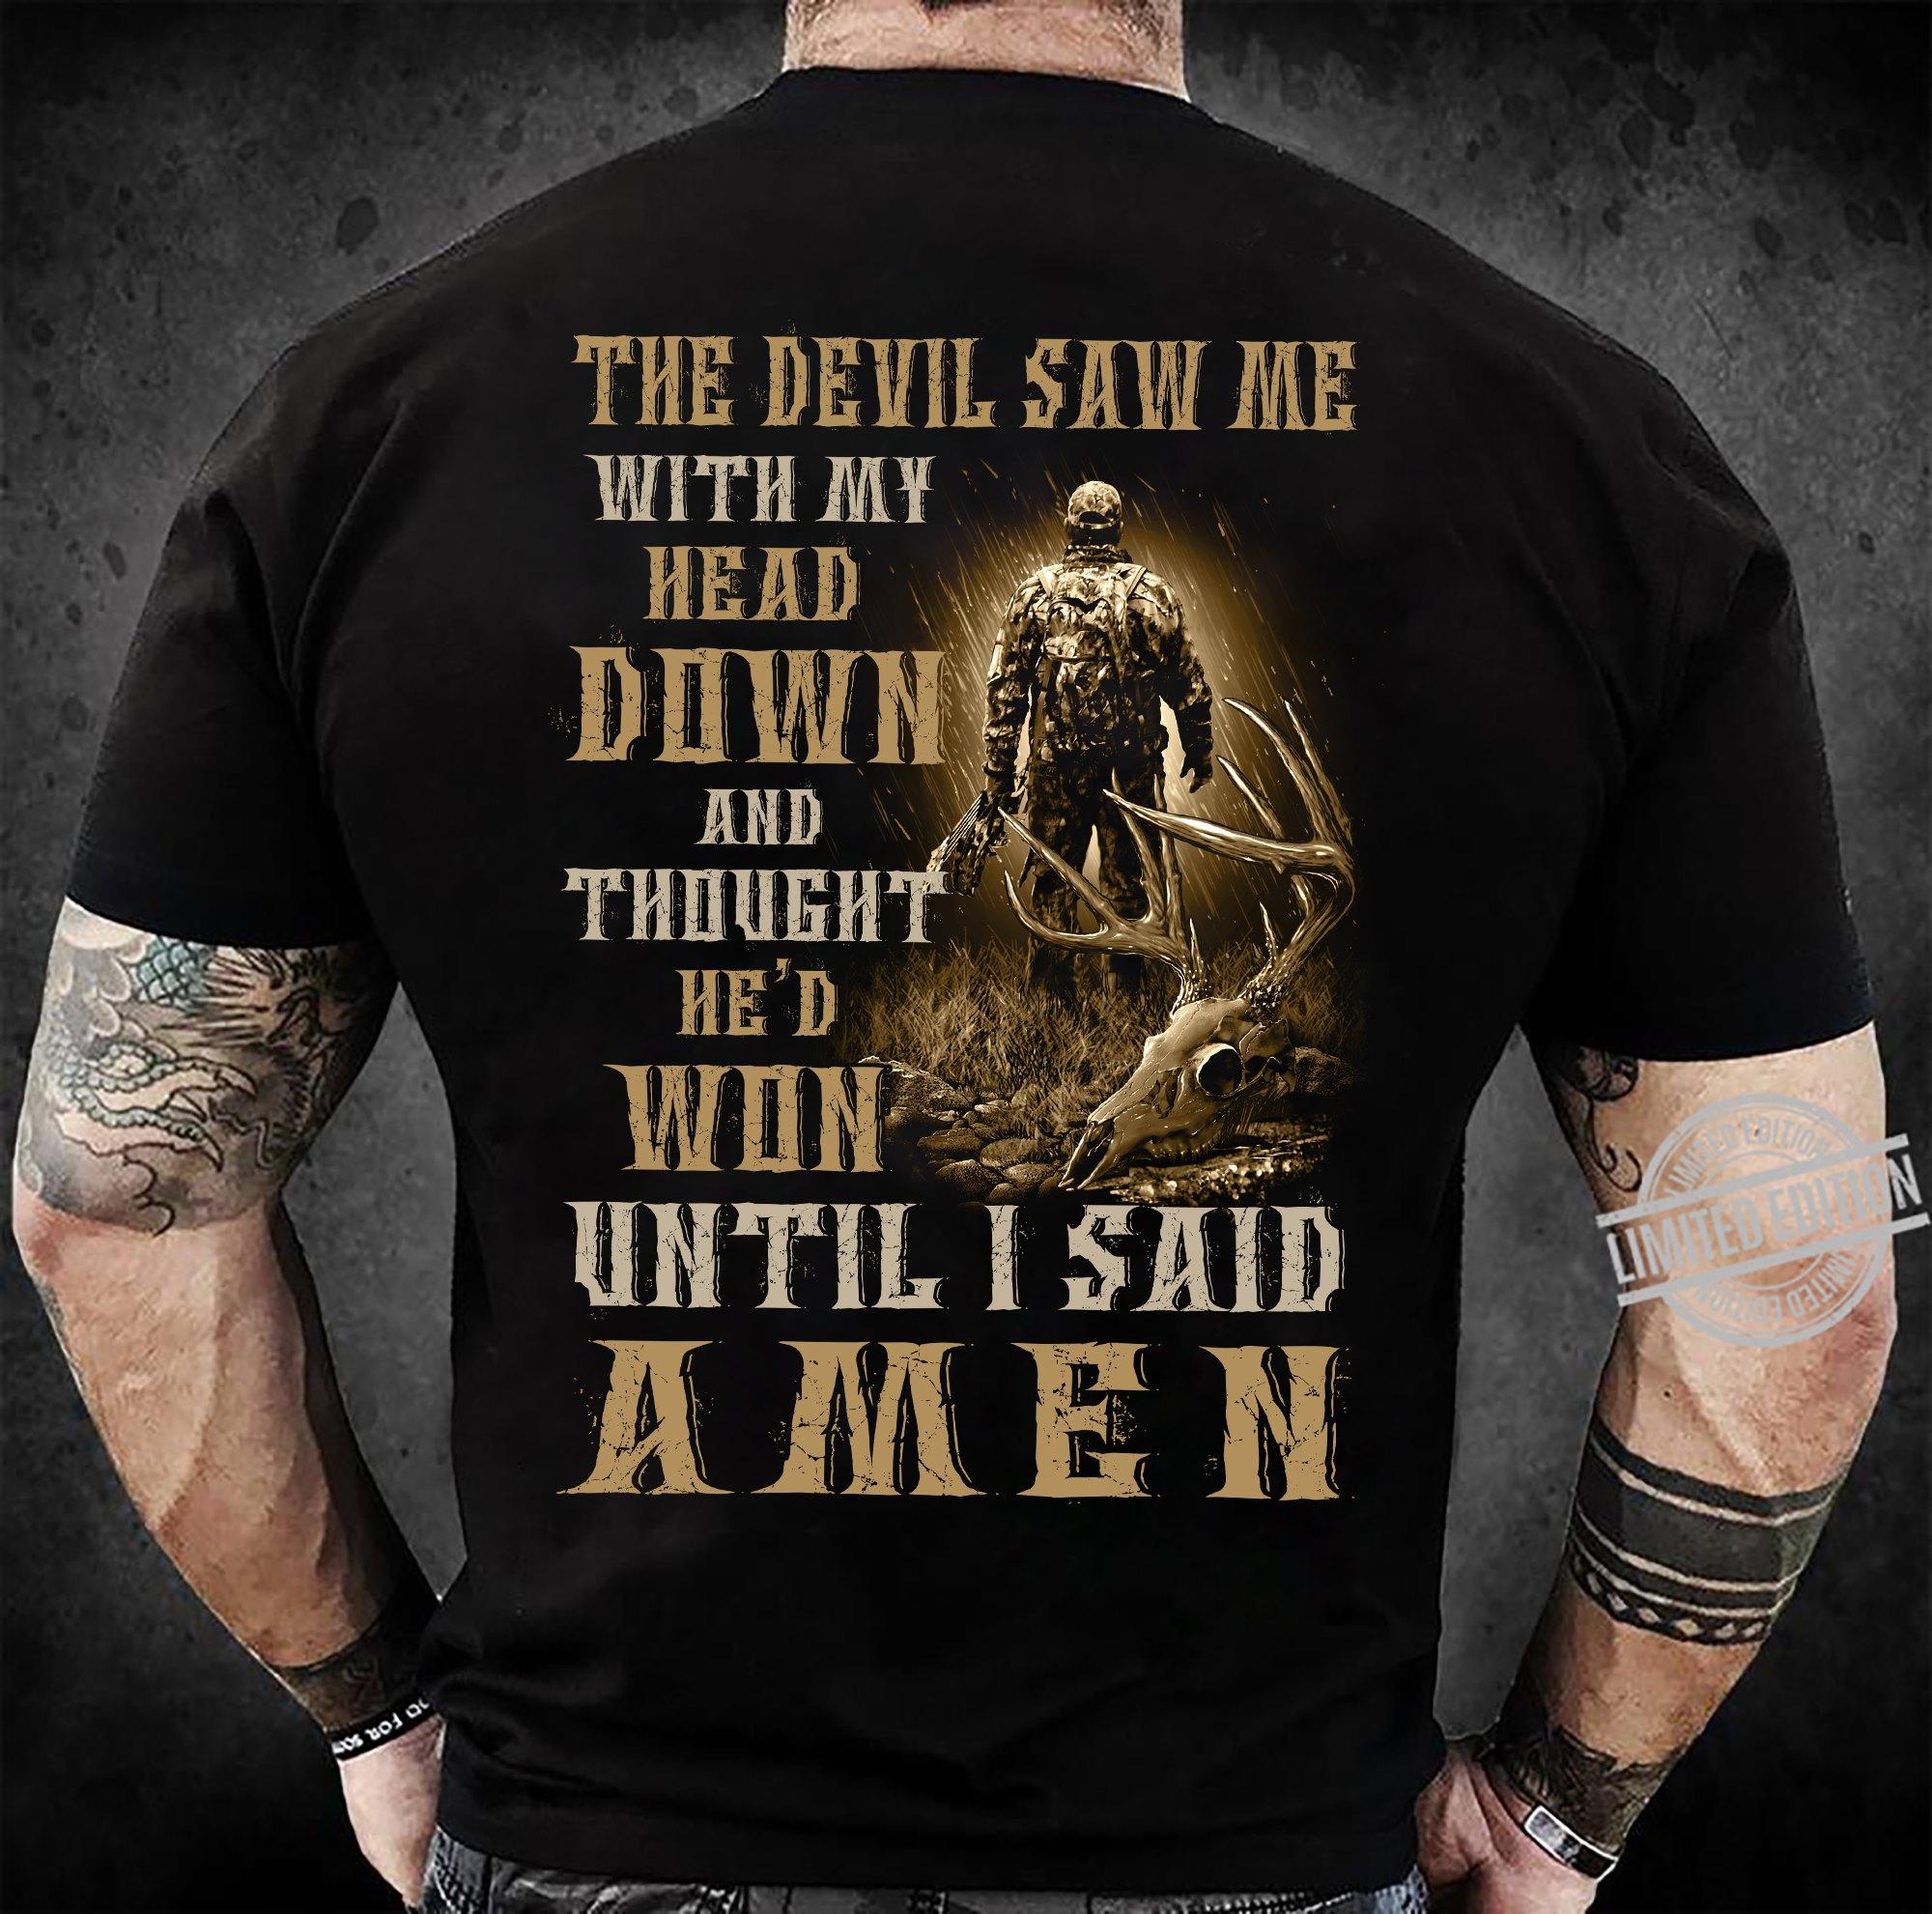 The devil saw me with my head down and thought he'd won until I said Amen - Believe in Jesus, T-shirt for veterans